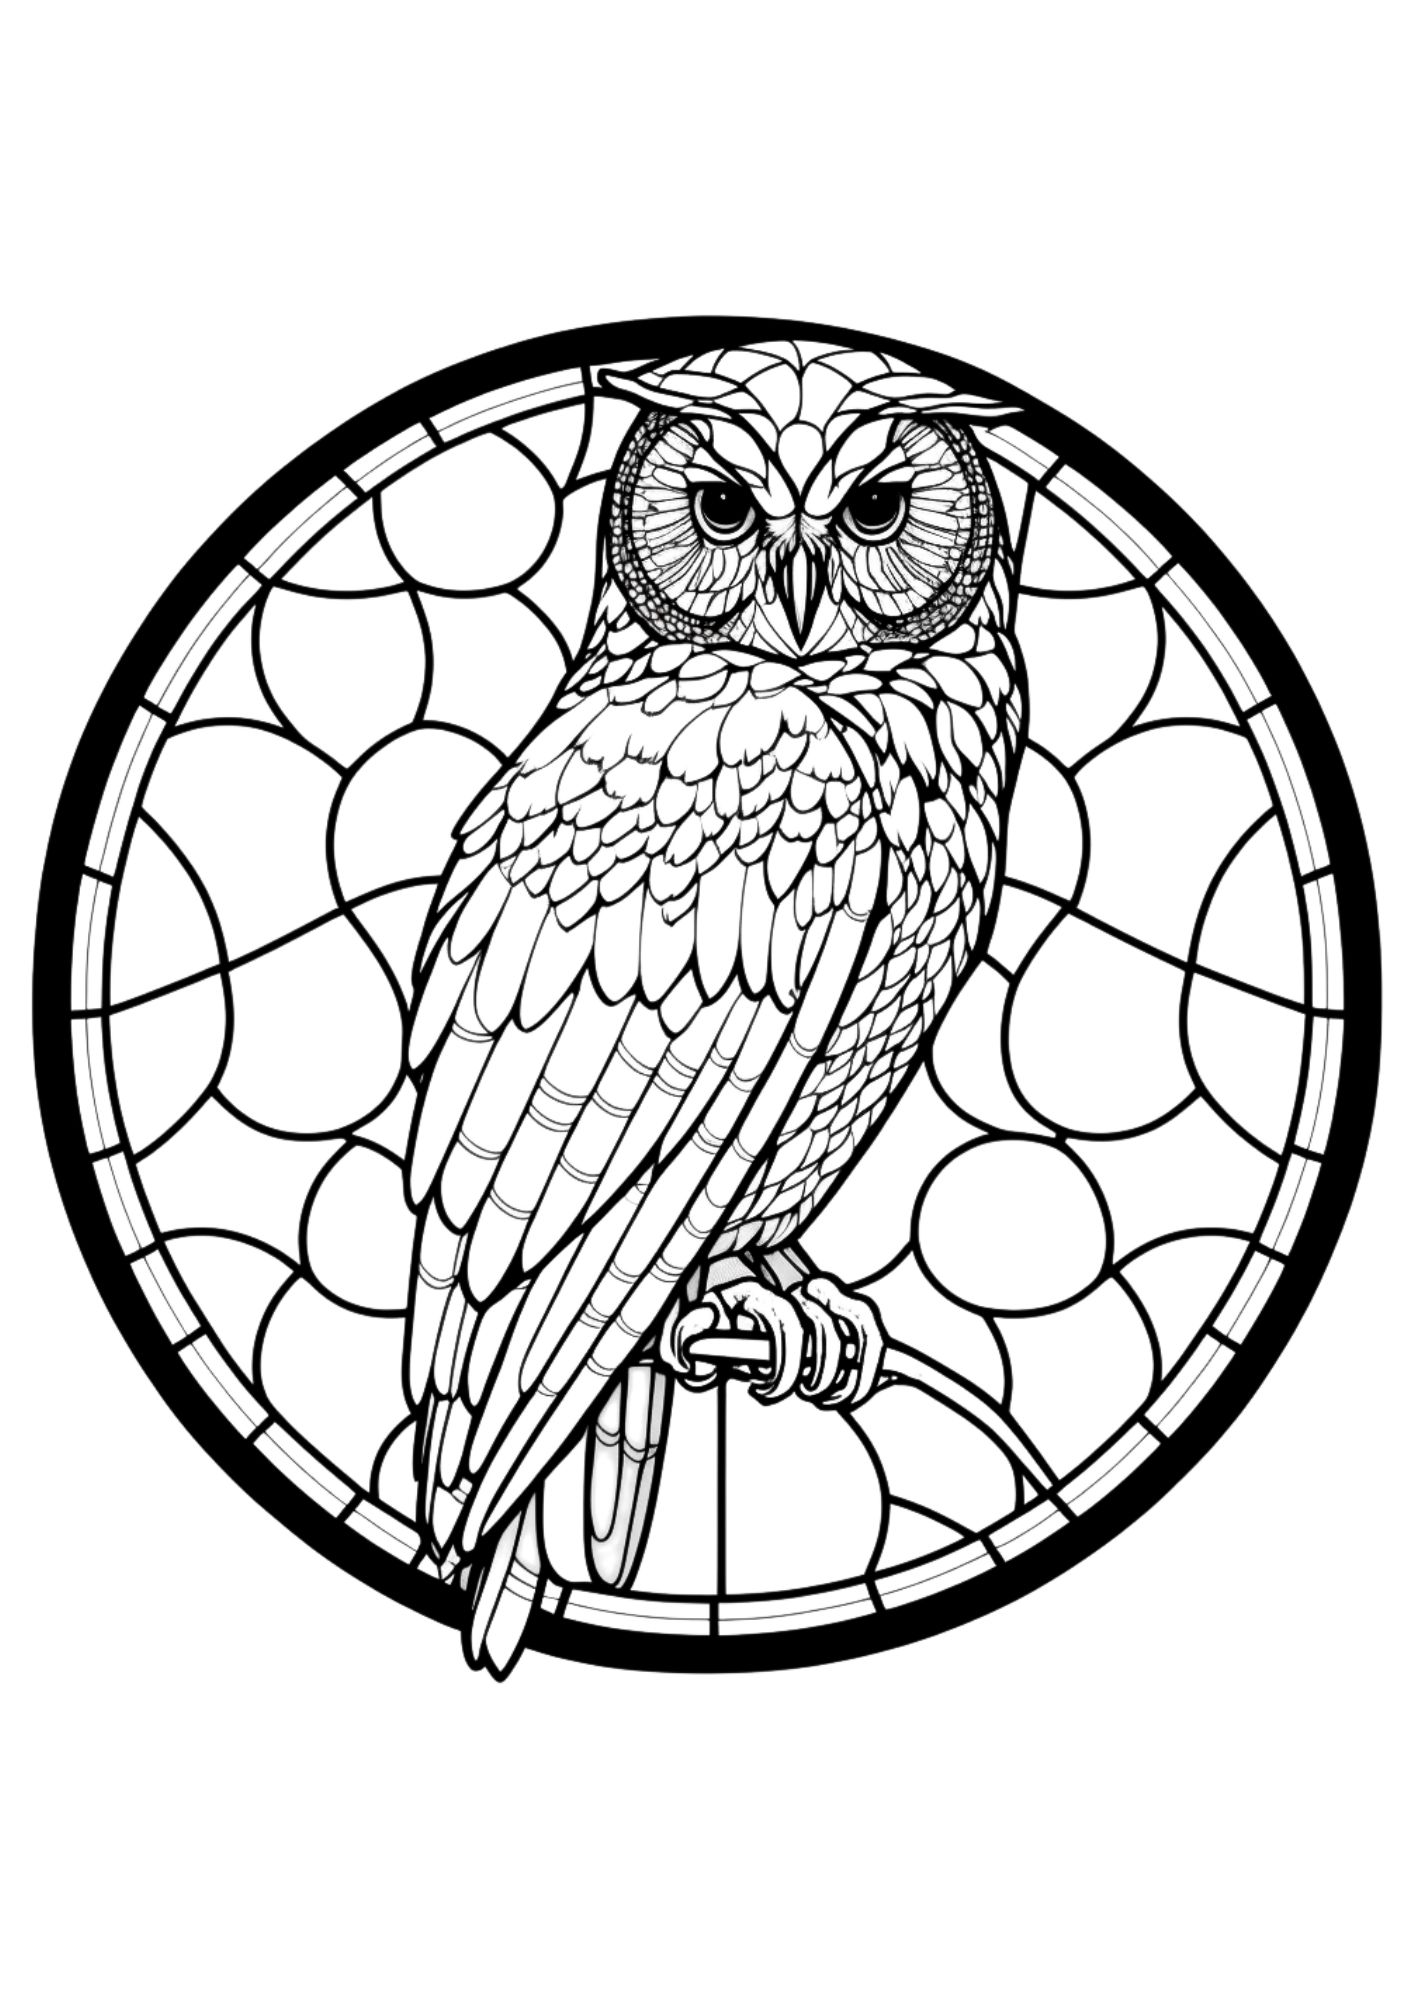 Hoot hoot owl coloring pages for everyone â free and printable